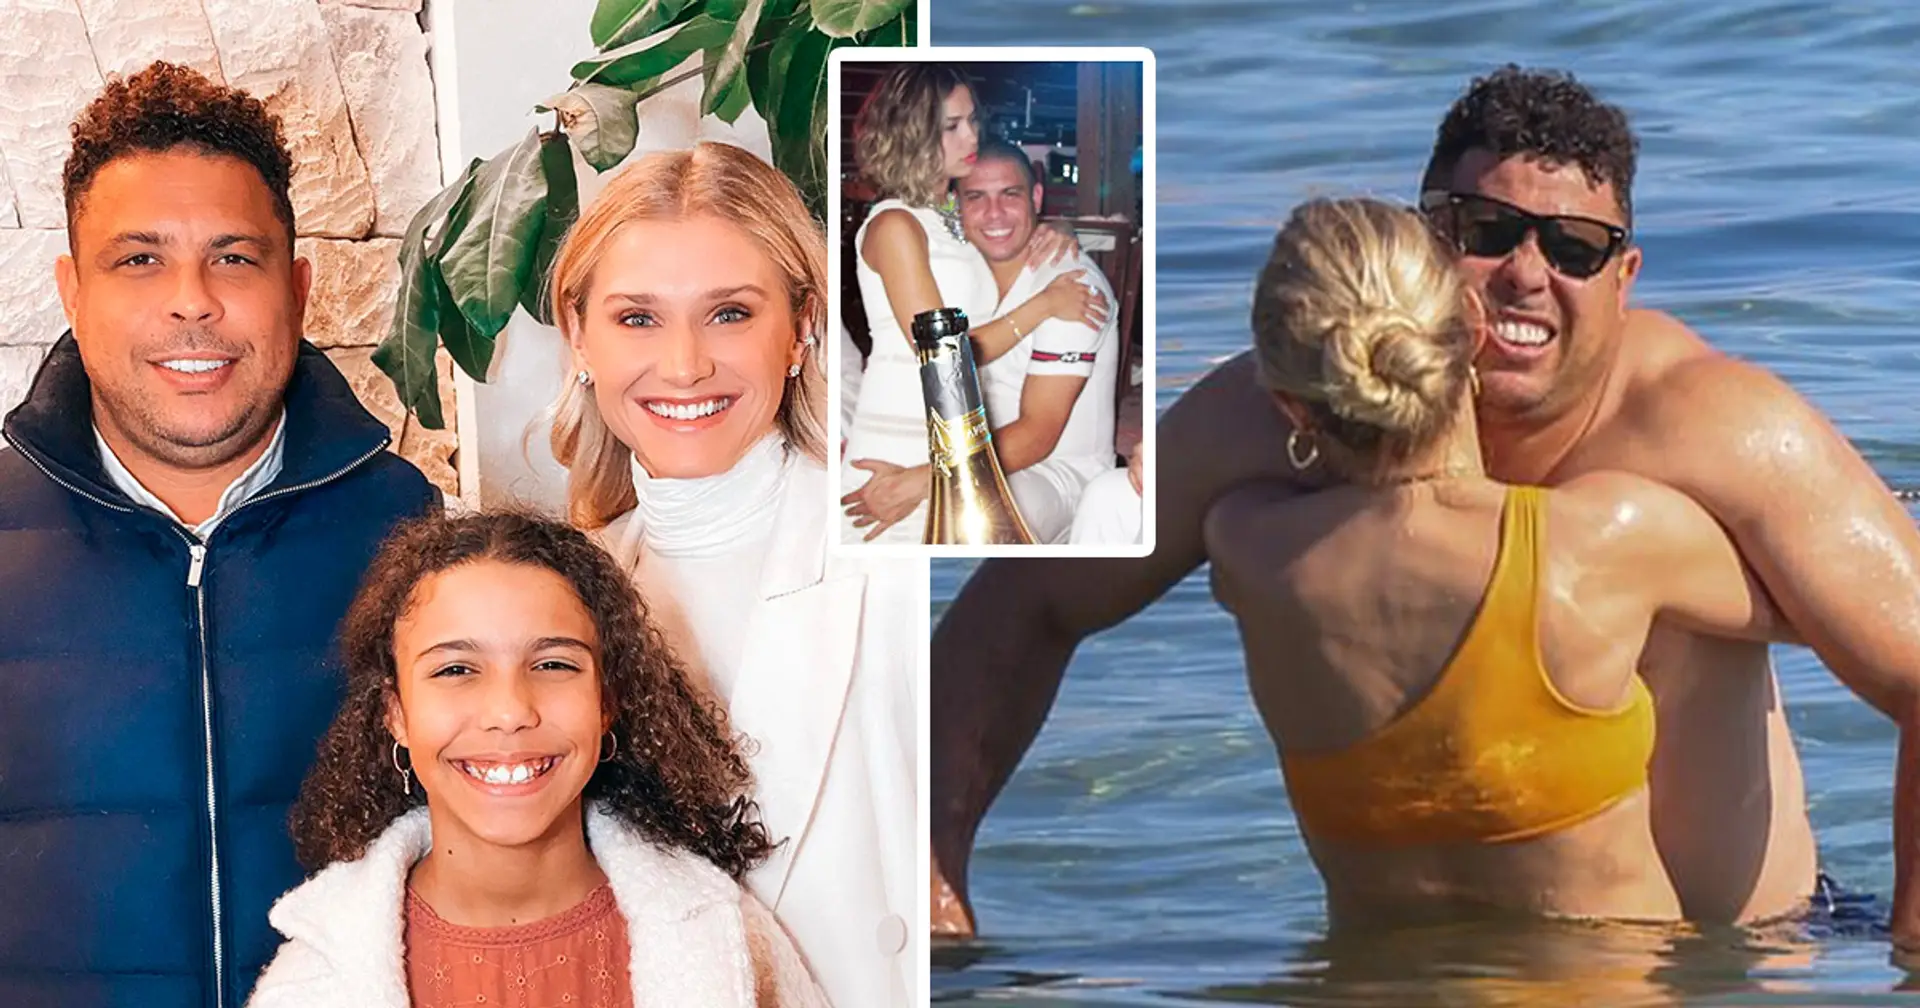 'I burst out laughing': Ronaldo's girlfriend Celina Locks reveals what the Brazilian legend told her when they first met